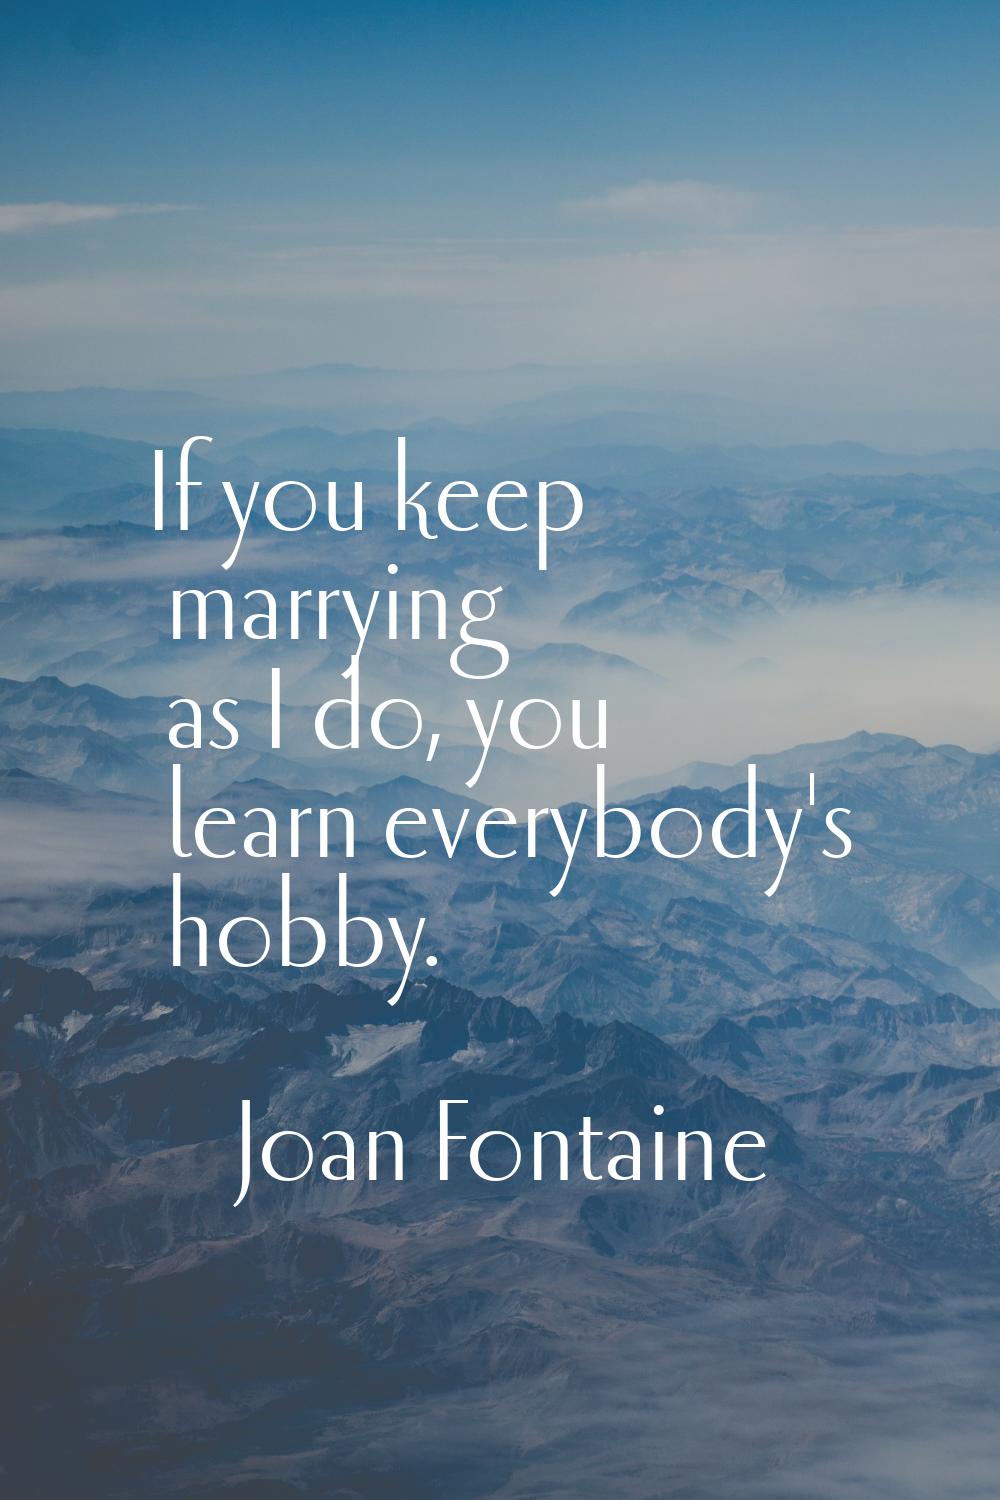 If you keep marrying as I do, you learn everybody's hobby.